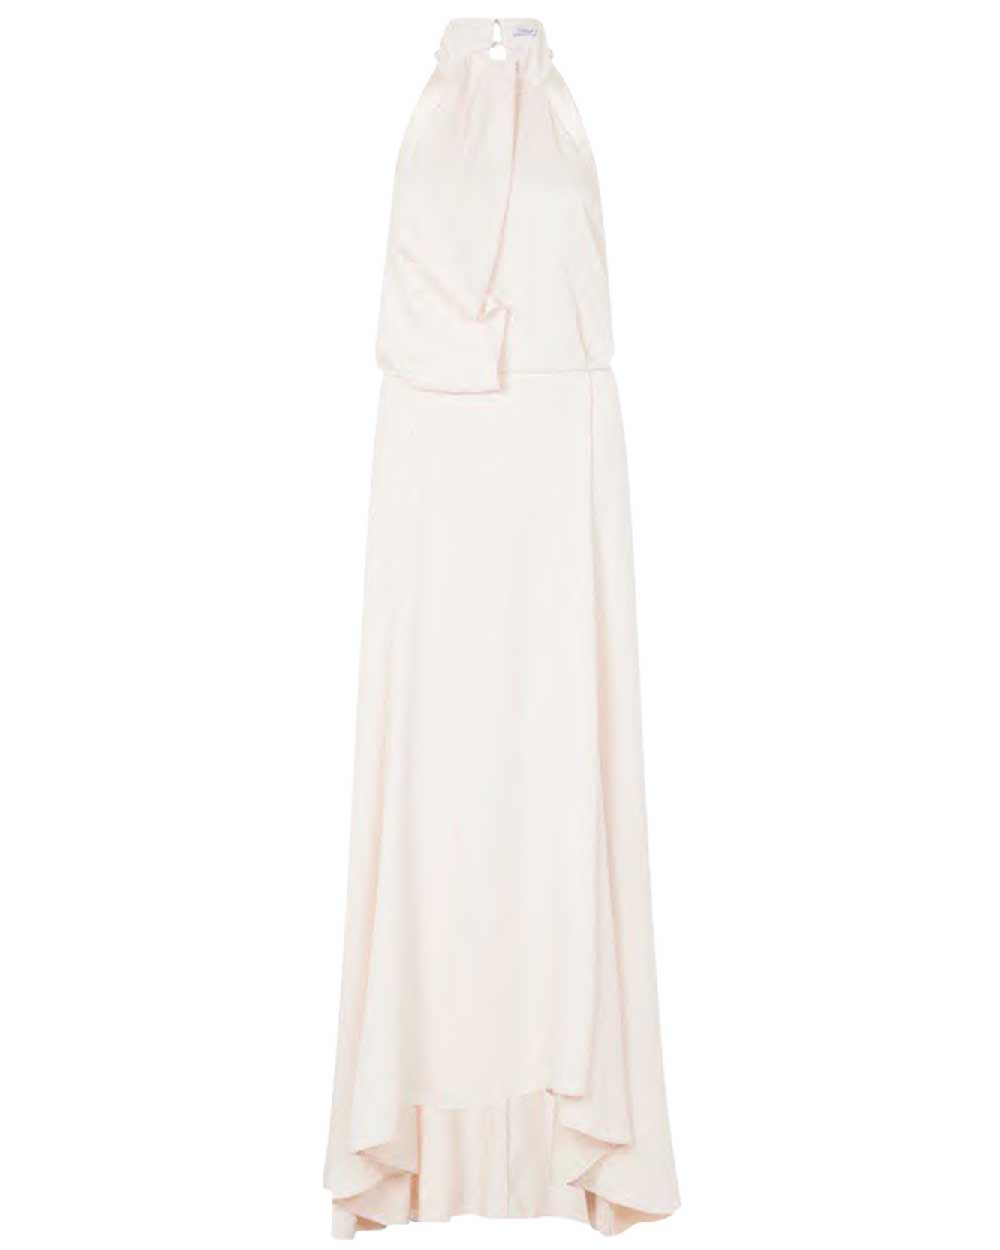 Camilla & Marc gown, $839